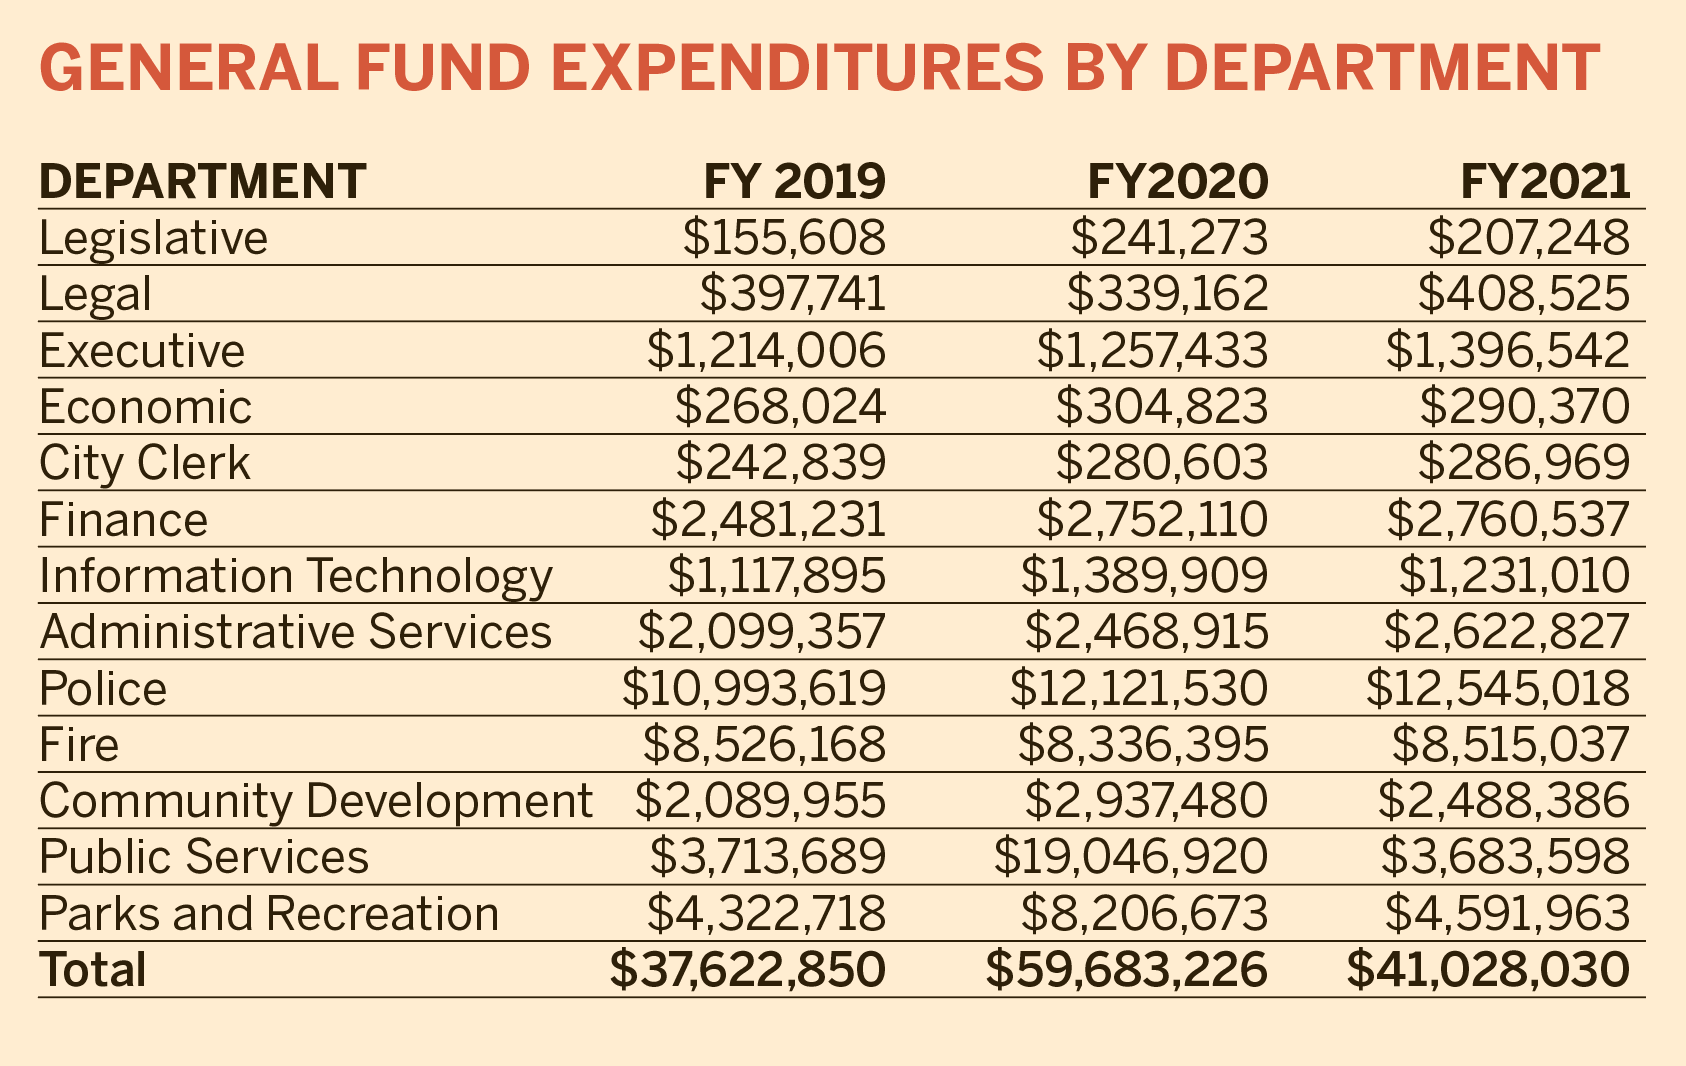 Here's a three-year comparison of General Fund expenditures by department.